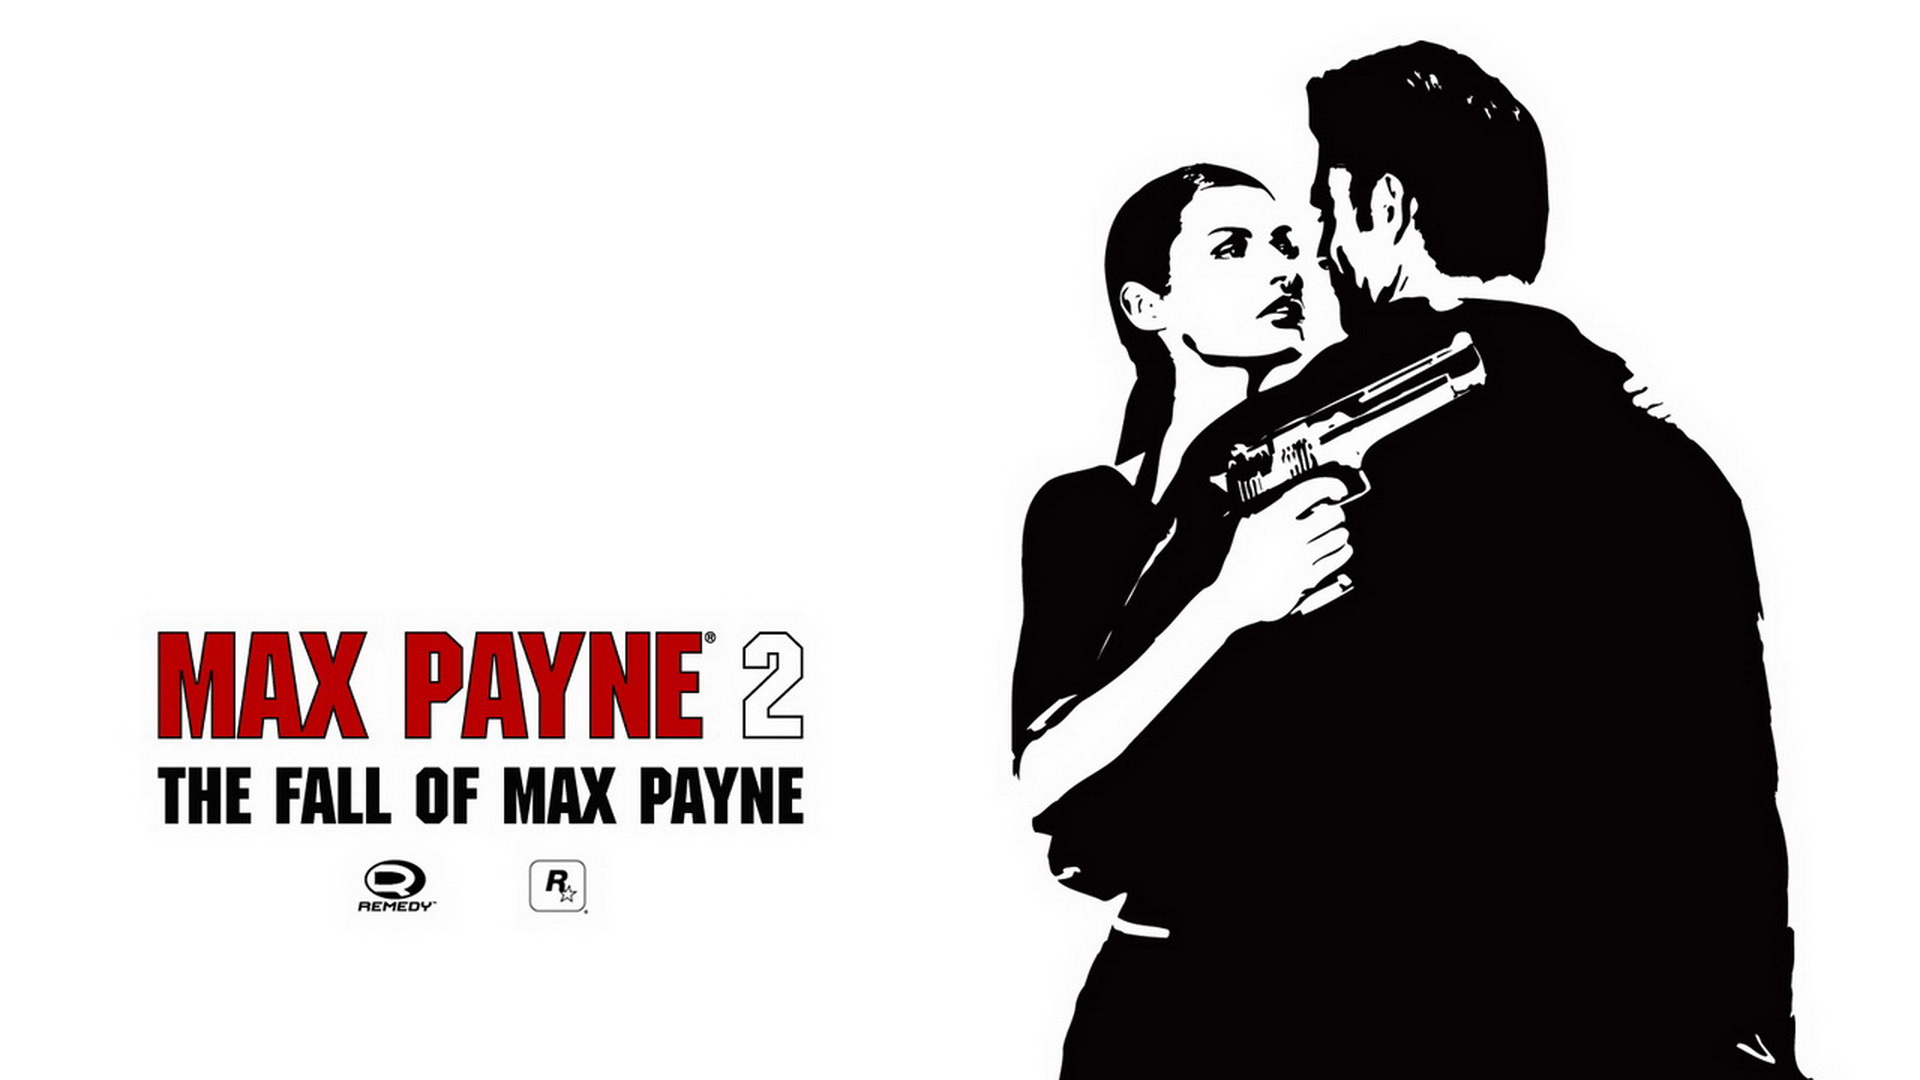 Video Game Max Payne 2: The Fall of Max Payne Wallpaper